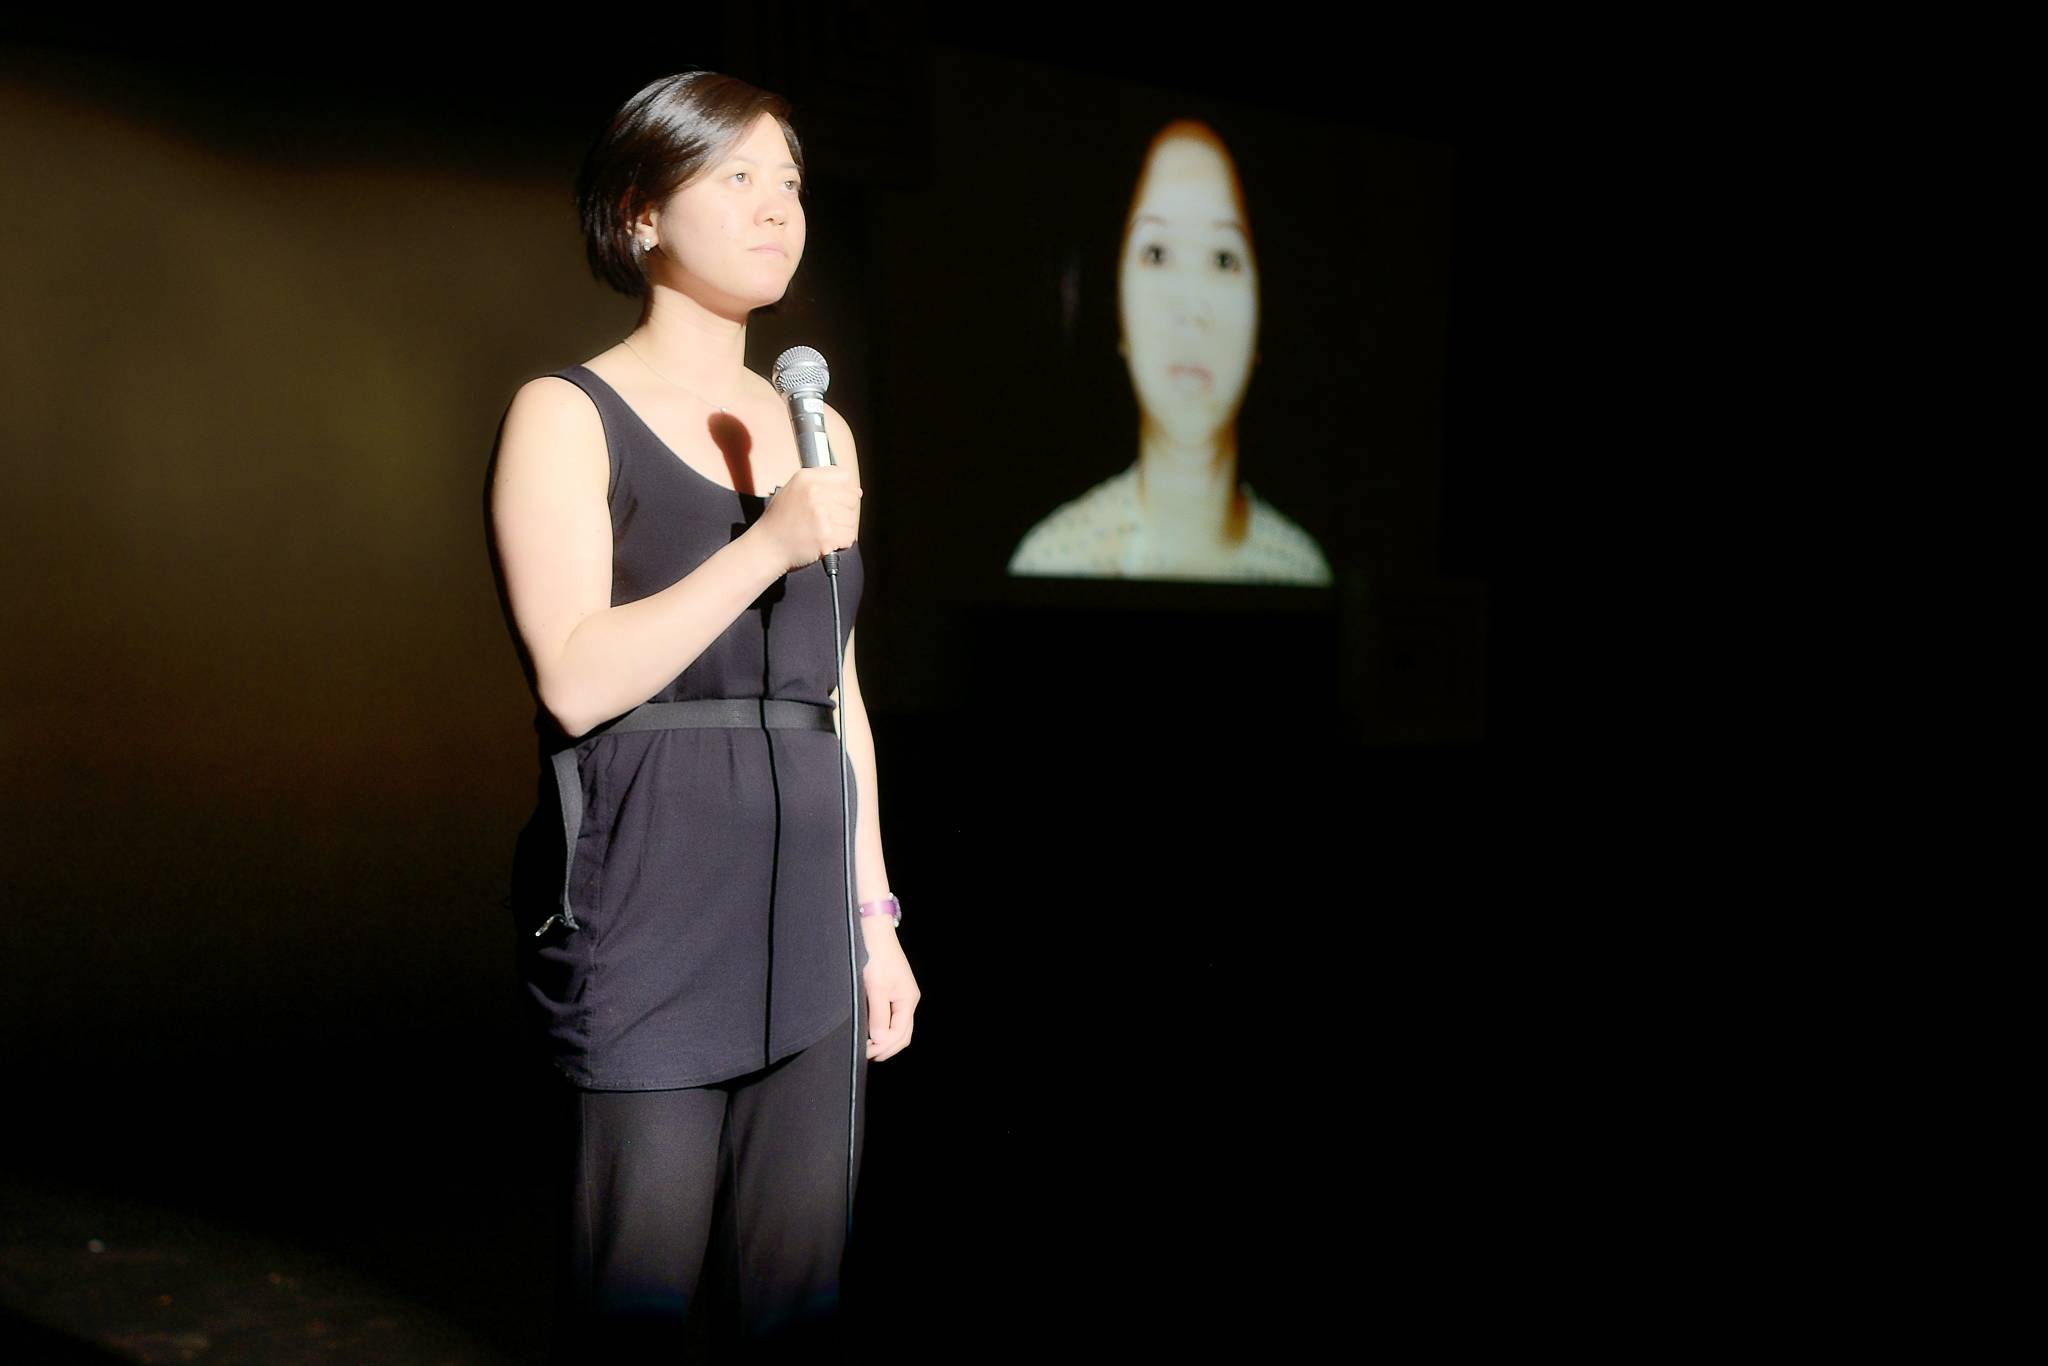 Susan Lieu performs a version of 140 LBS at Northwest New Works in 2018. Photo by Joe Iano